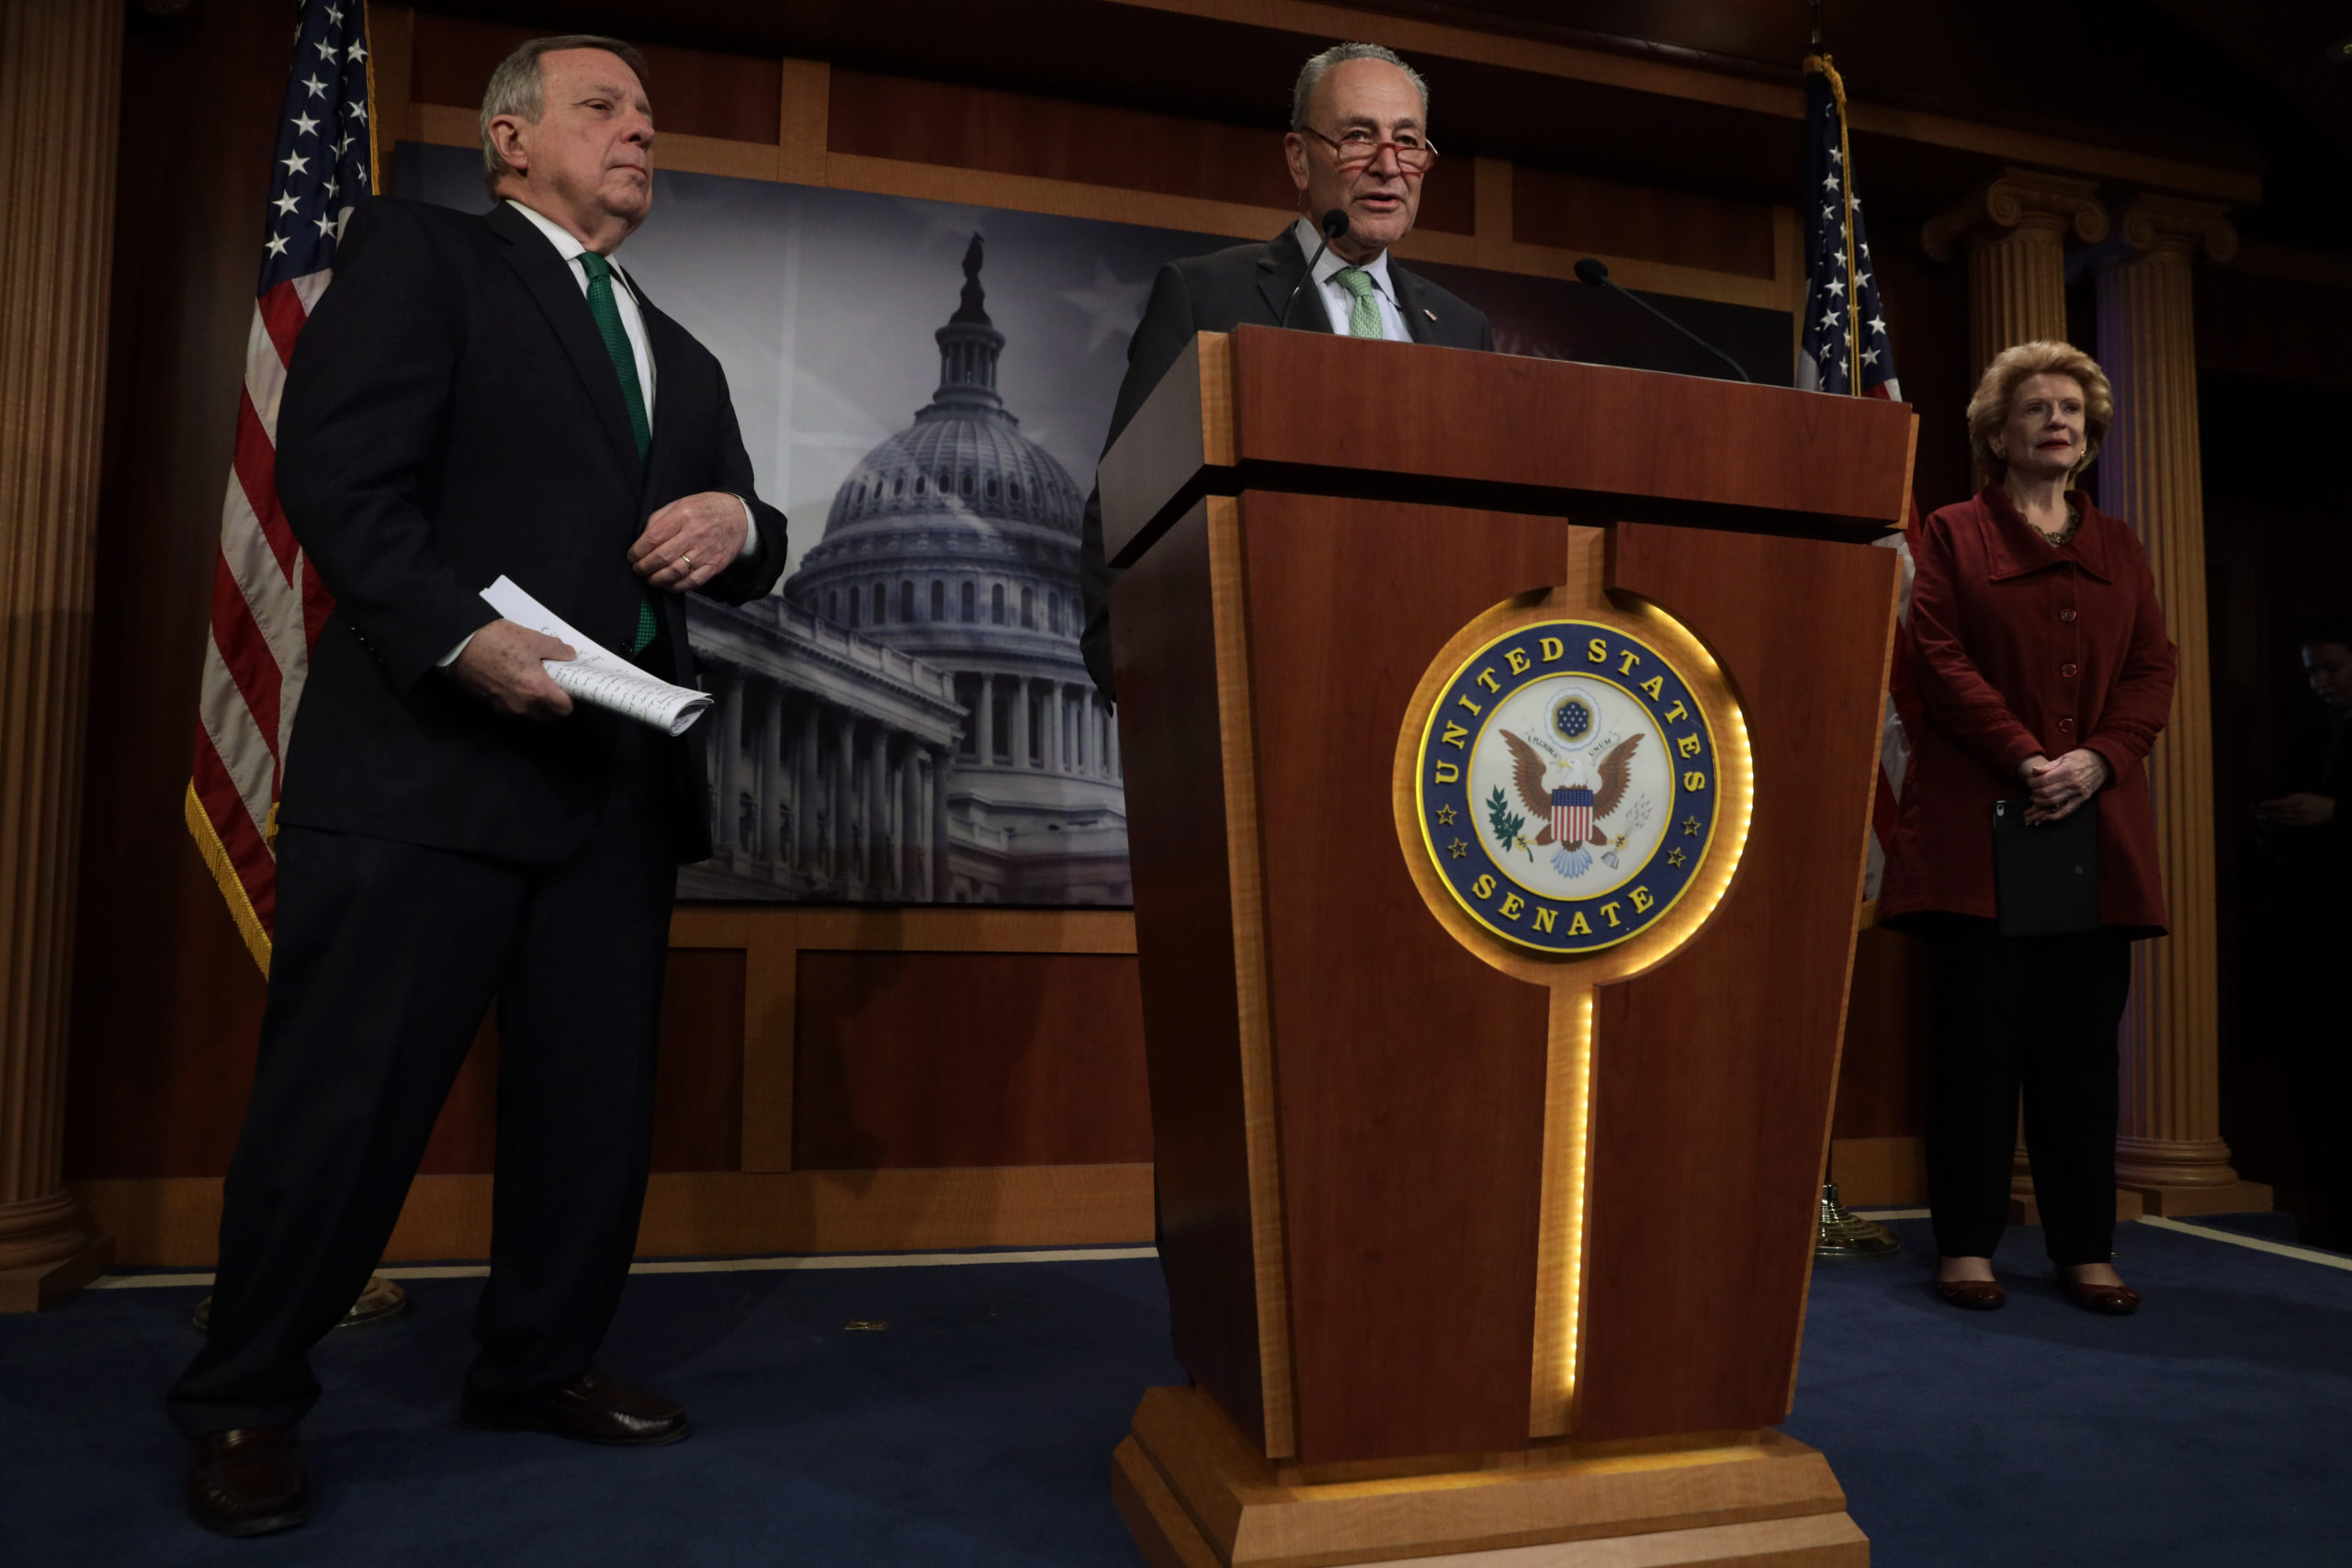 Then-Senate Minority Leader Chuck Schumer speaks about the coronavirus relief package on March 17, 2020. (Alex Wong/Getty Images)